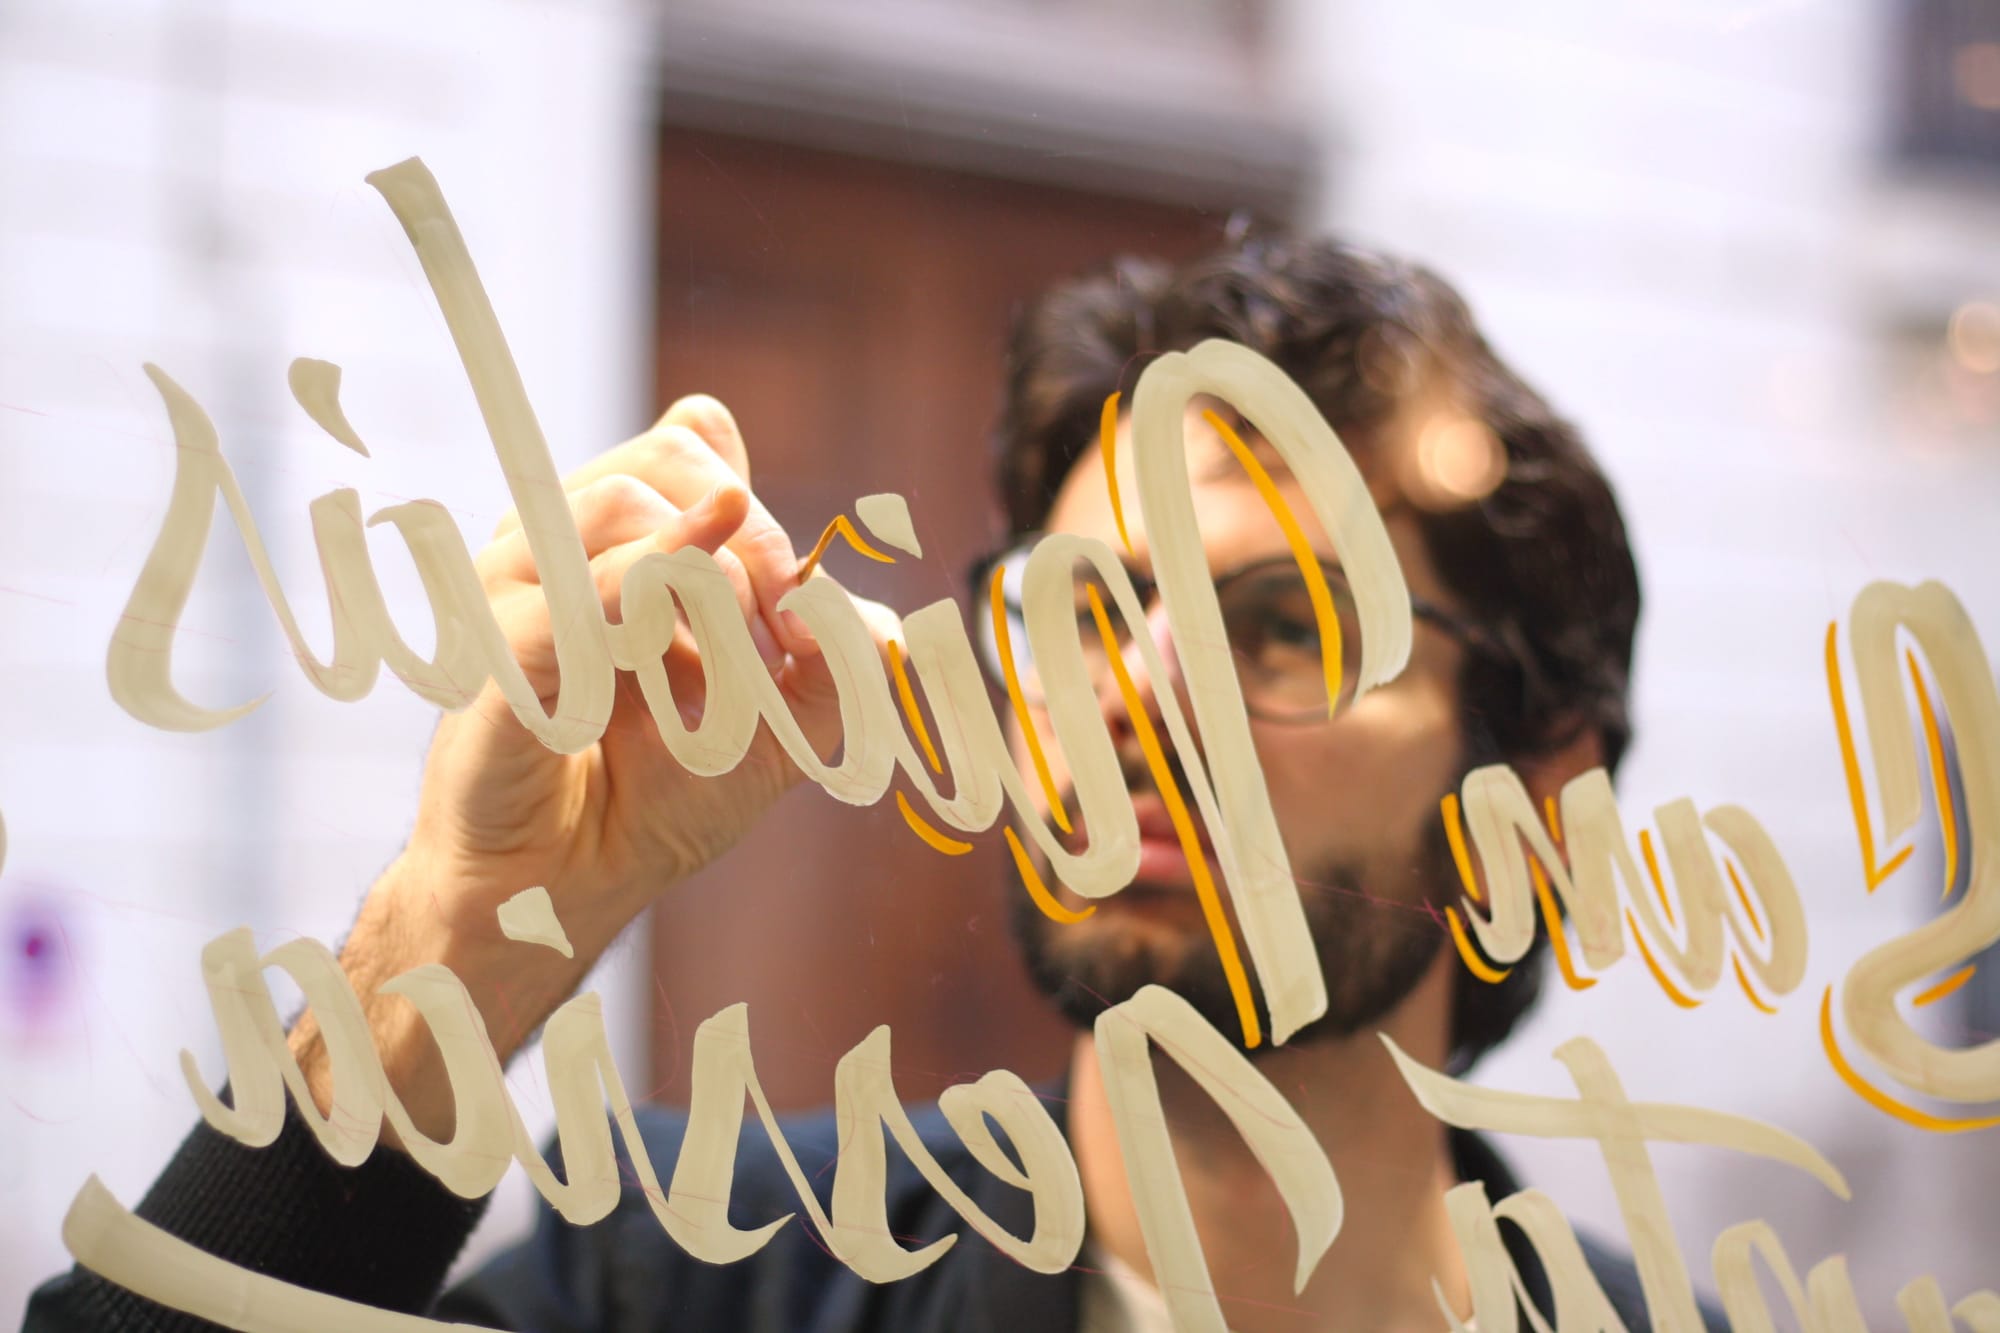 View through glass of a man applying a yellow offset shade to some lettering on the window.